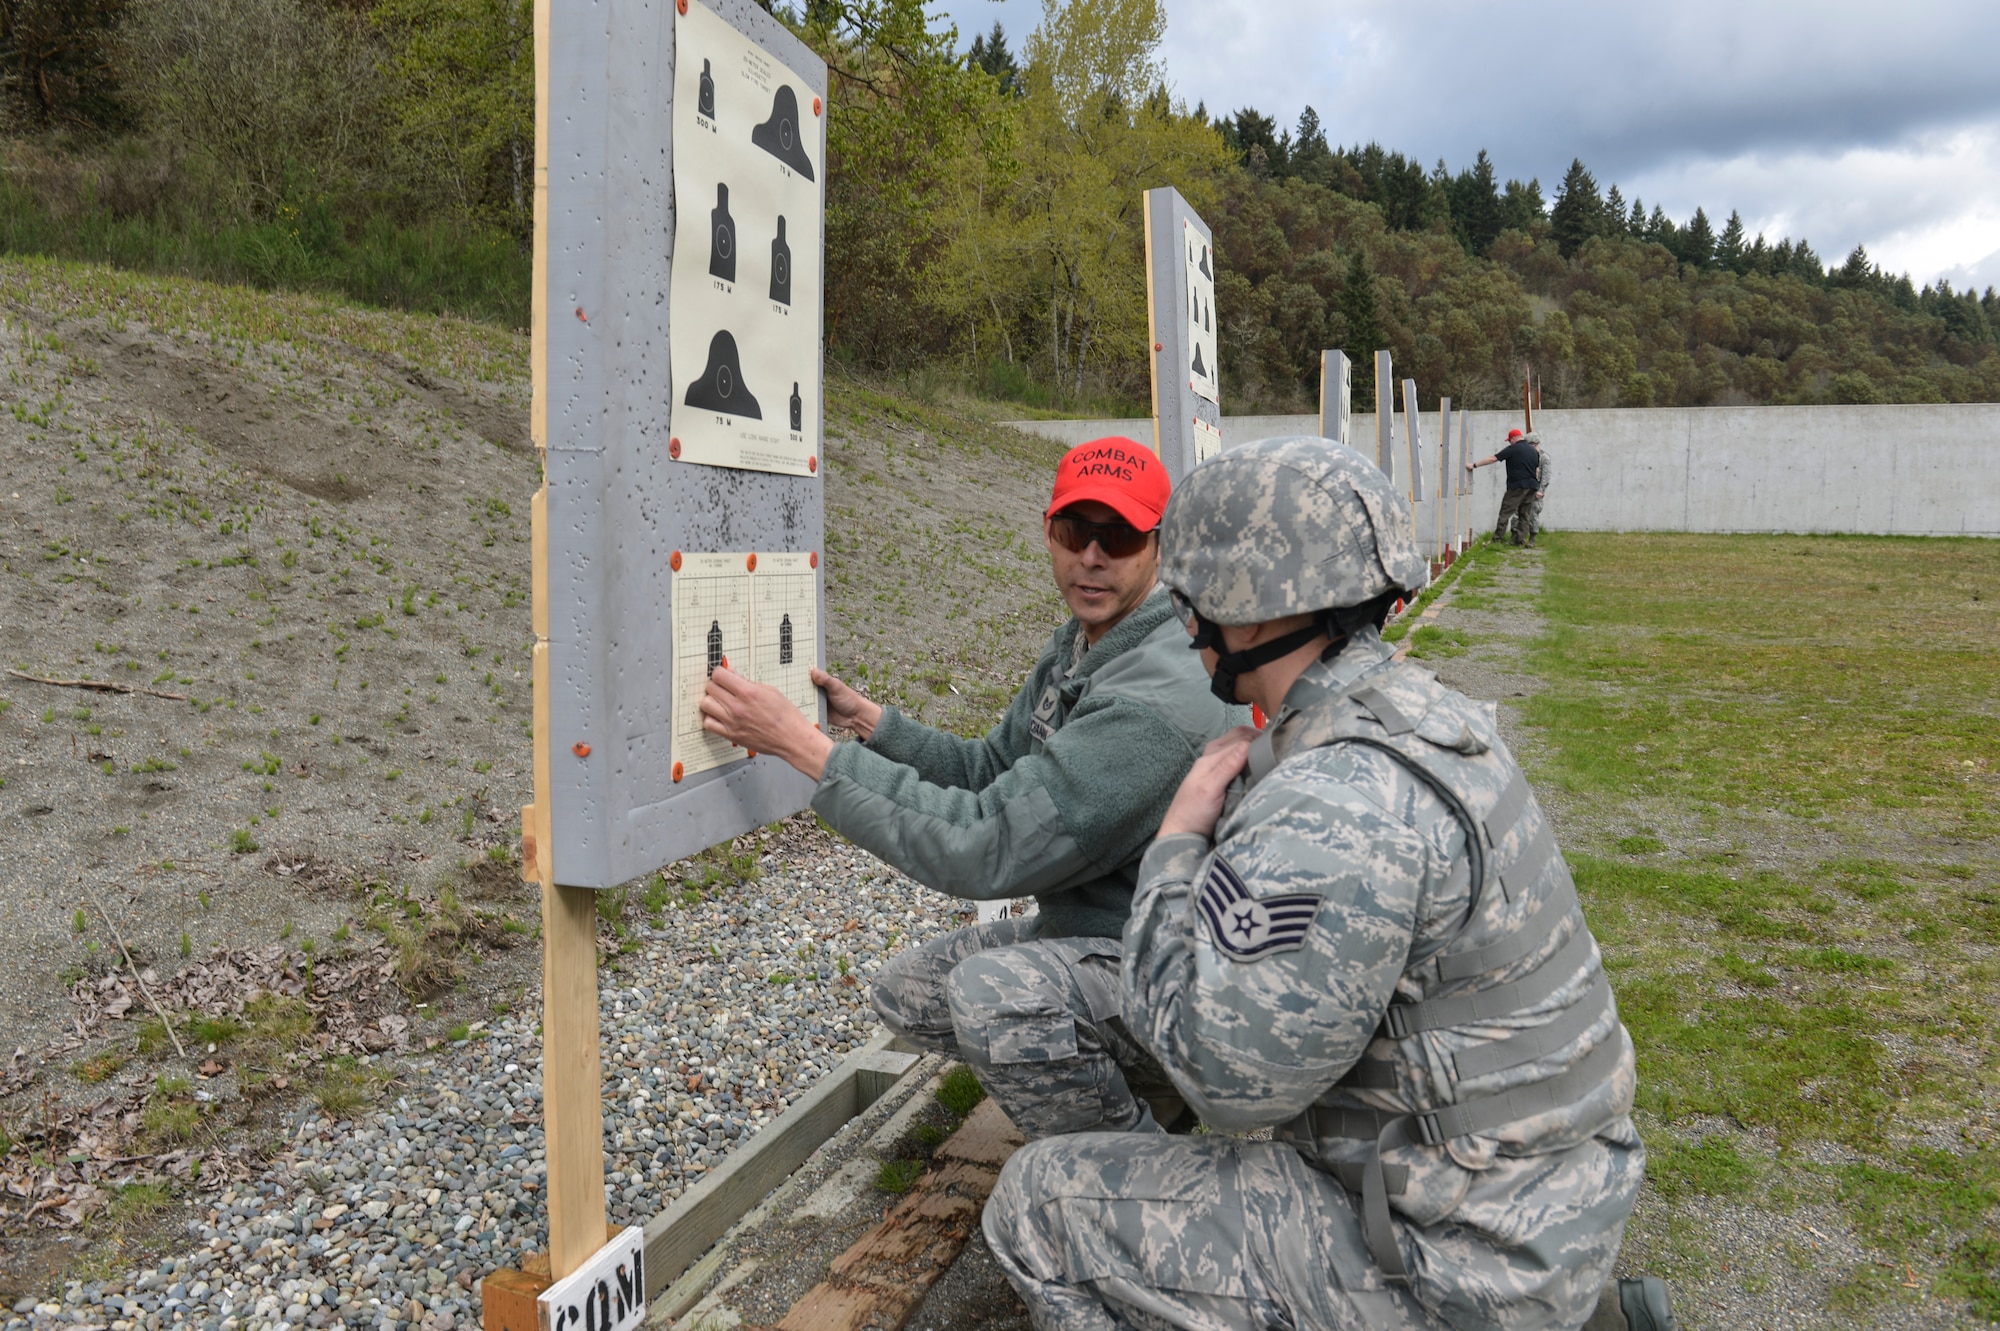 Tech. Sgt. David Buchanan, 446 Security Forces Squadron combat arms instructor, explains zeroing rifle corrections to Staff Sgt. James Horne, 62nd Maintenance Squadron crew chief, at Range 108 next to North Fort Lewis, April 9, 2014 at Joint Base Lewis-McChord, Wash. Airmen need to accomplish weapons training and qualification prior to deploying to an area that requires them to carry a weapon. (U.S. Air Force photo/Staff Sgt. Russ Jackson)